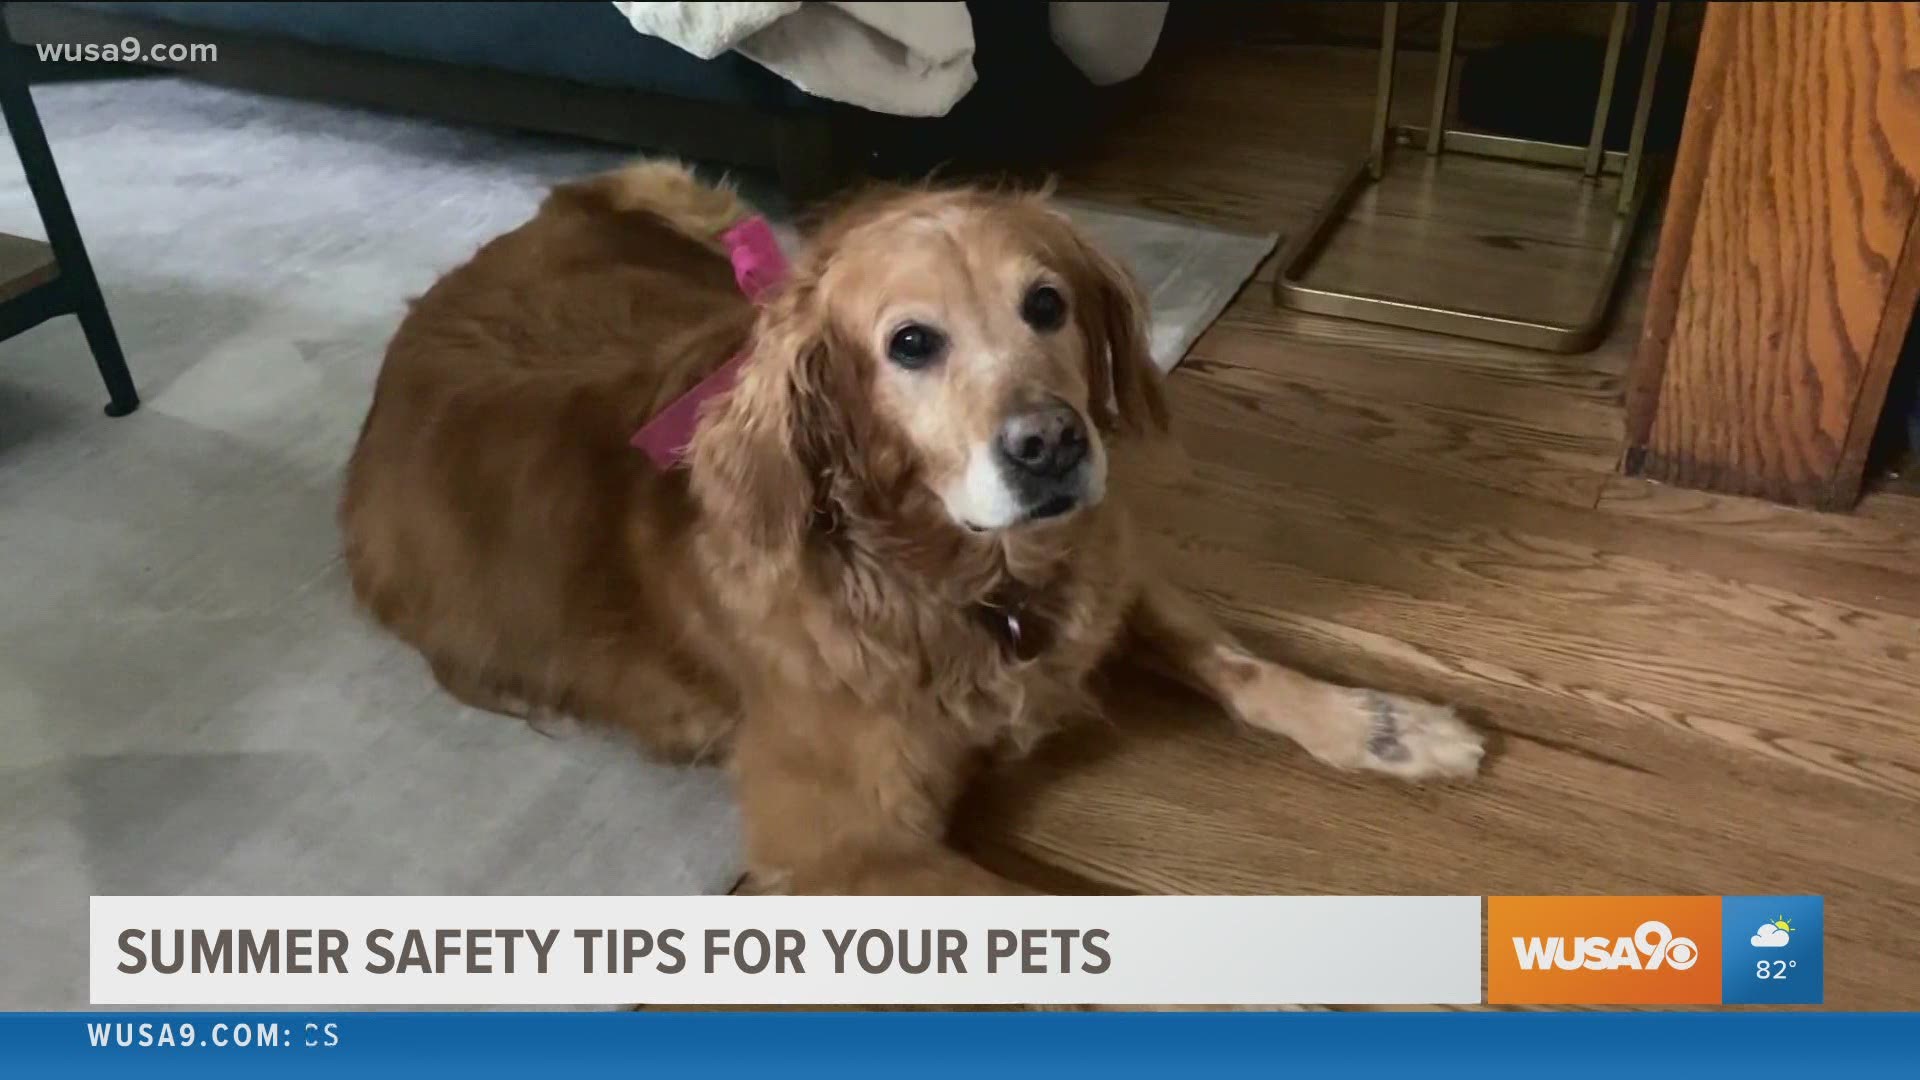 Dr. Robin Ganzert, President and CEO of American Humane shares tips on how to keep your pets safe during the summer heat.